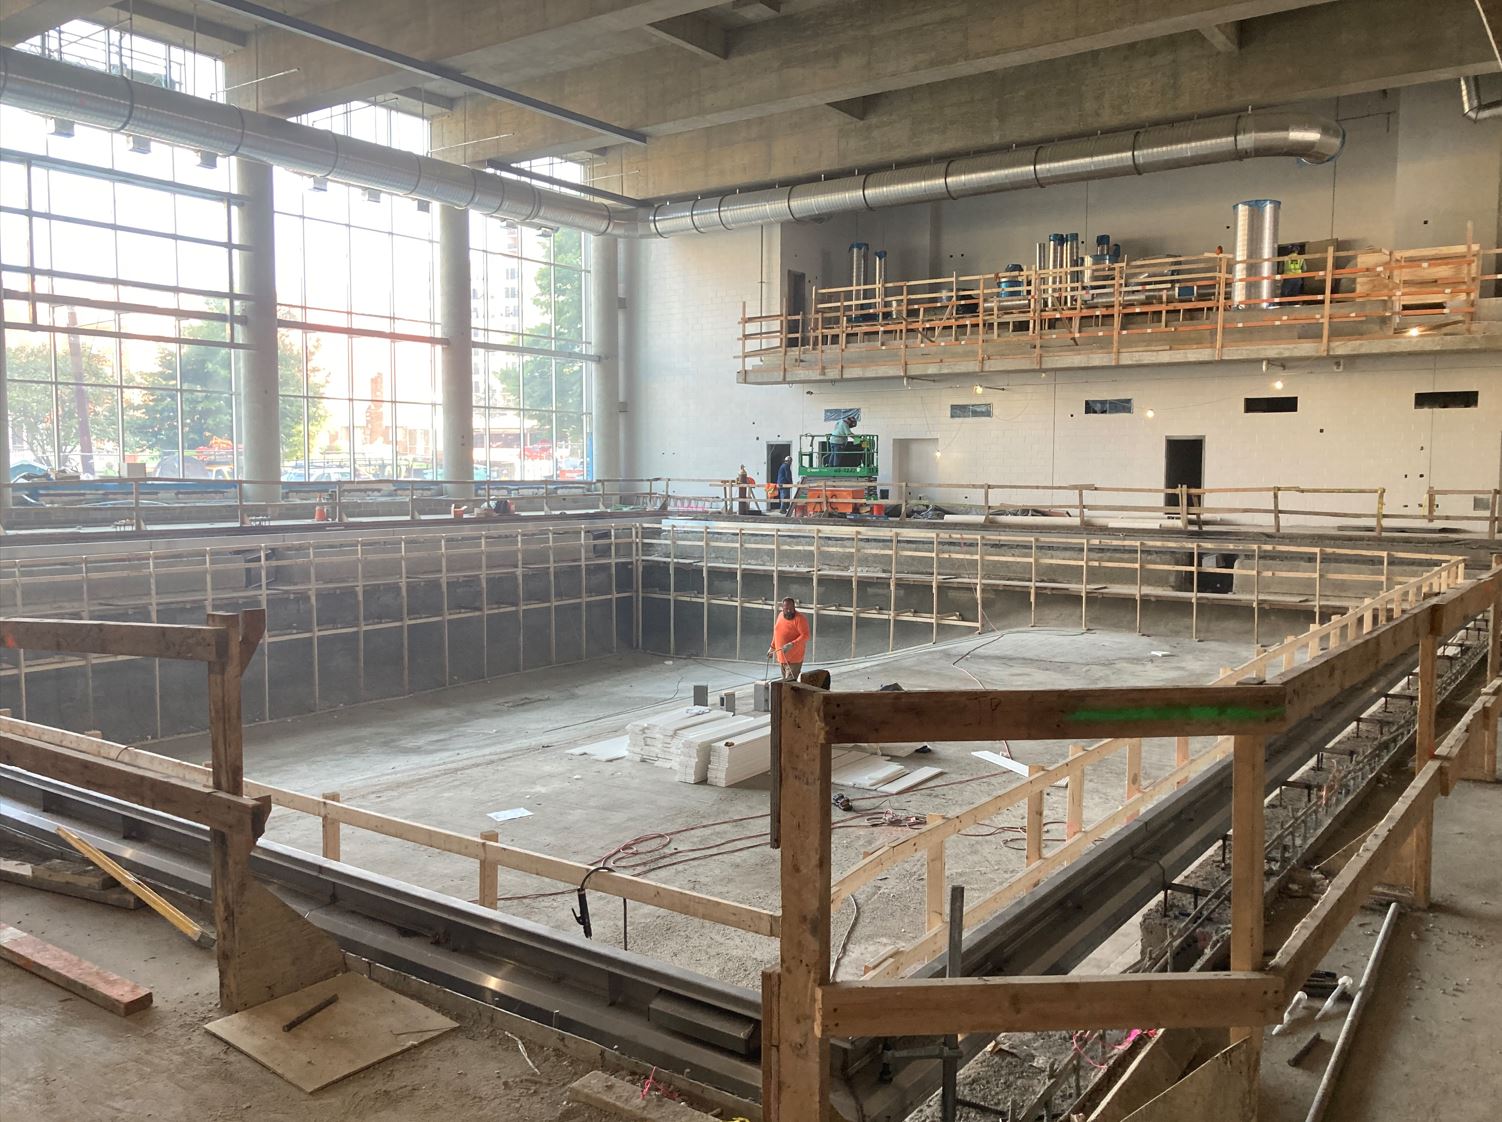 View of competition pool under construction.